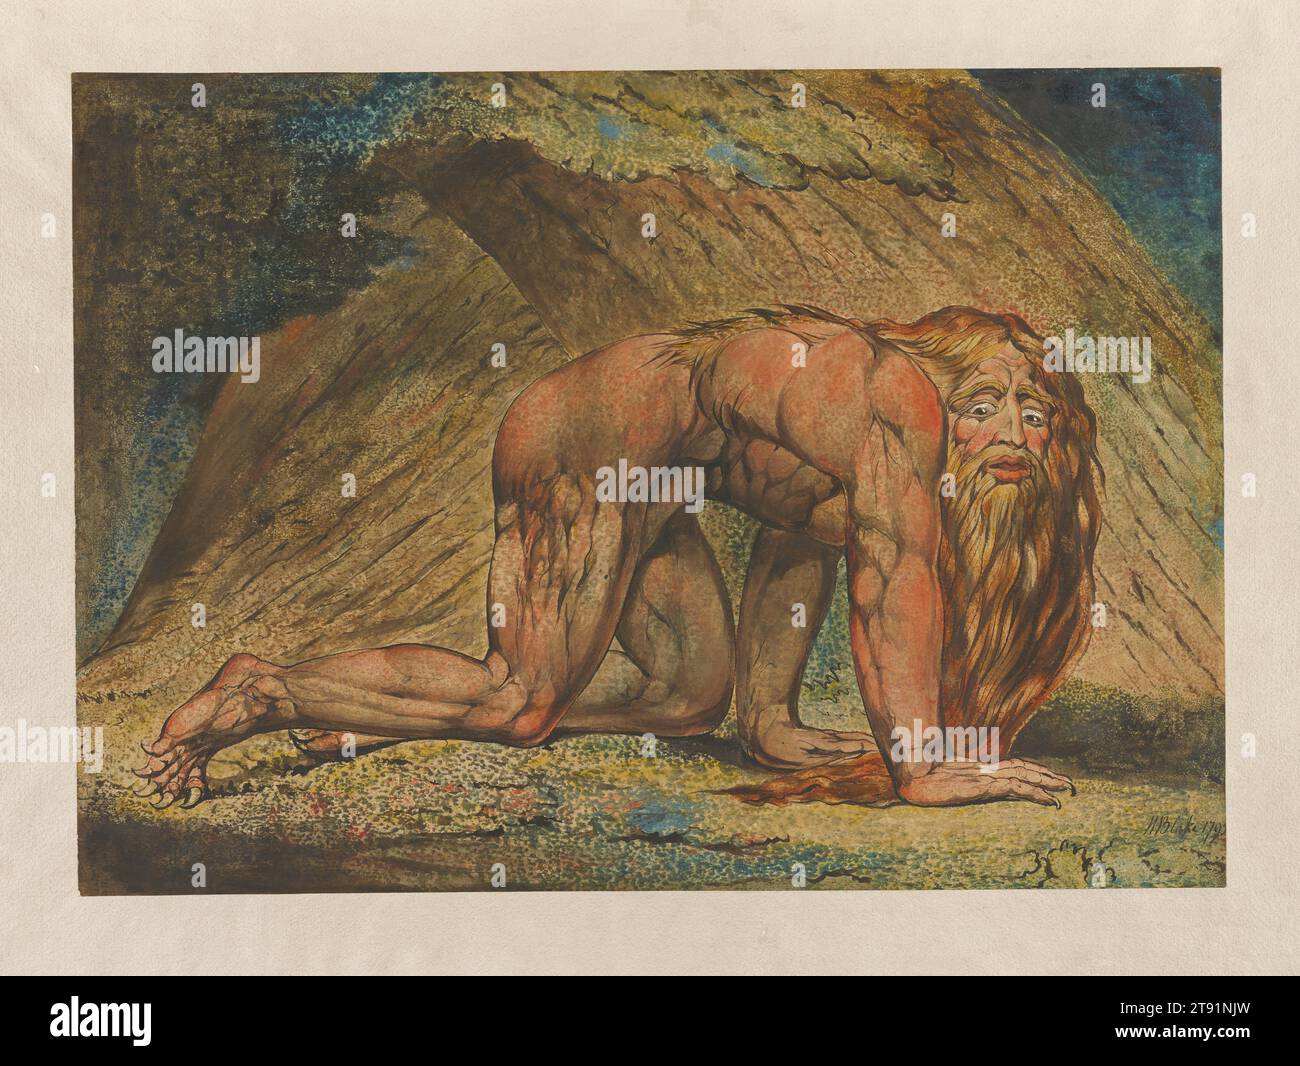 Nebuchadnezzar, 1795, William Blake, British, 1757–1827, 16 15/16 x 23 3/4 in. (43.0 x 60.3 cm) (sheet)23 3/4 x 29 3/4 x 1 1/8 in. (60.33 x 75.57 x 2.86 cm) (outer frame), Color monotype in tempera, finished with pen, black ink and watercolor on cream paper, England, 18th century, King Nebuchadnezzar of Babylon failed to heed the prophet Daniel’s warning to mend his sinful ways and show mercy to the poor. God stripped the king of his realm and drove him to 'eat grass as oxen, . . . his body . . . wet with the dew of heaven, till his hairs were grown like eagles’ feathers Stock Photo